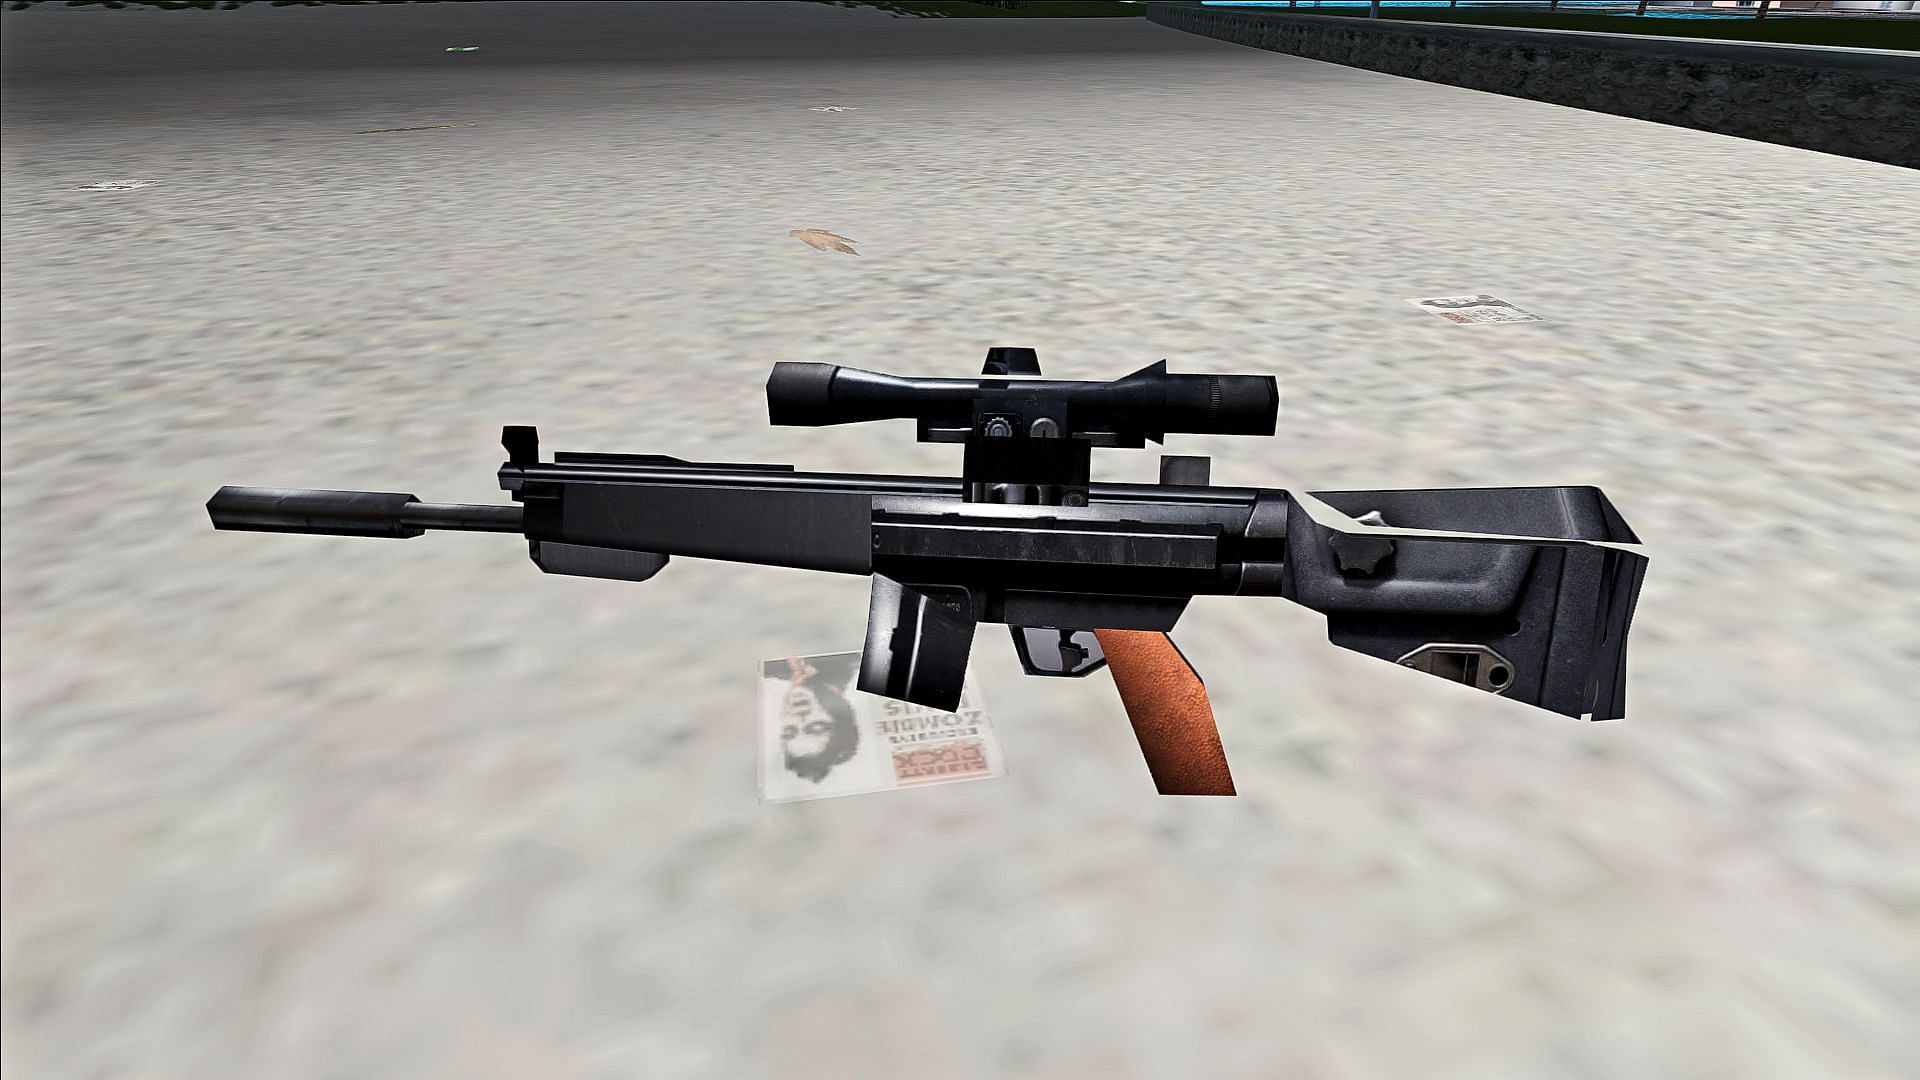 The weapons use high-quality models in this mod (Image via MixMods)